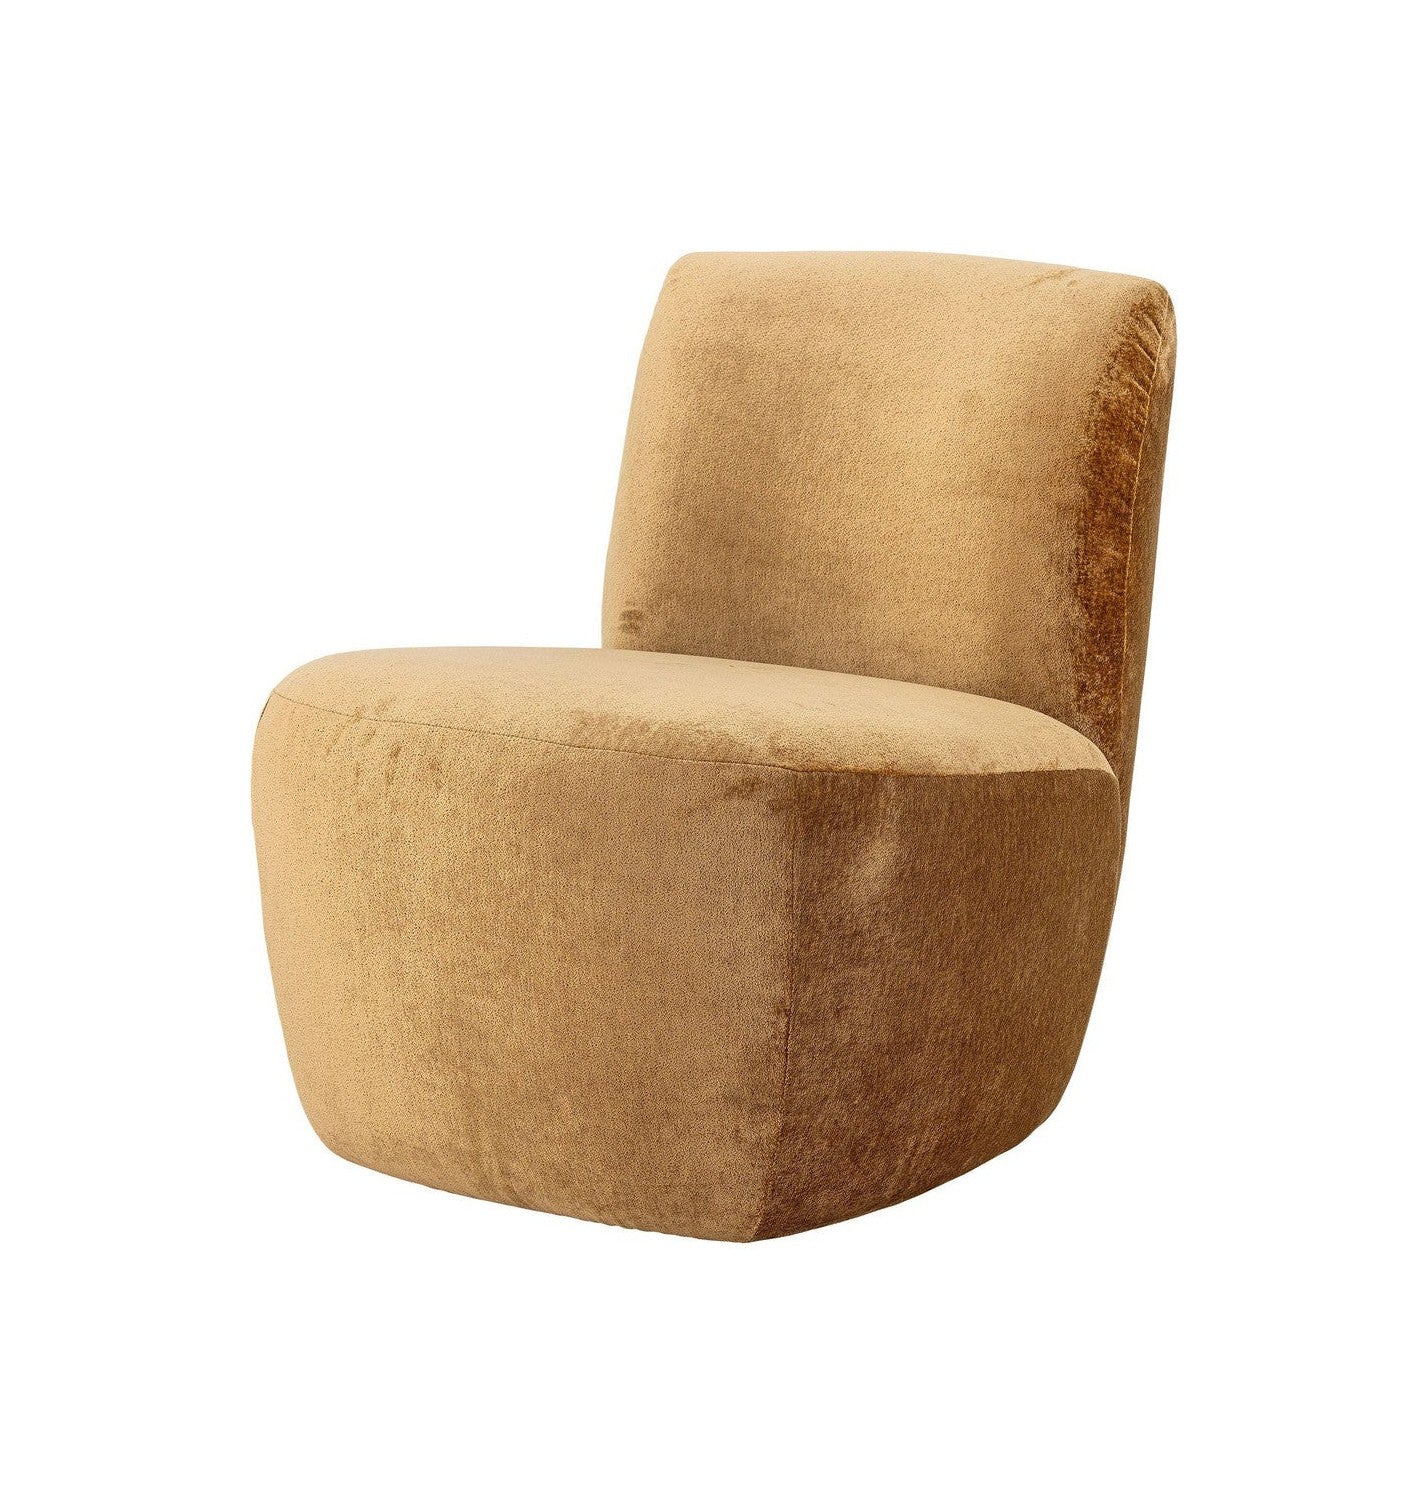 Creative Collection Almonde Lounge Chair, Brown, Polyester